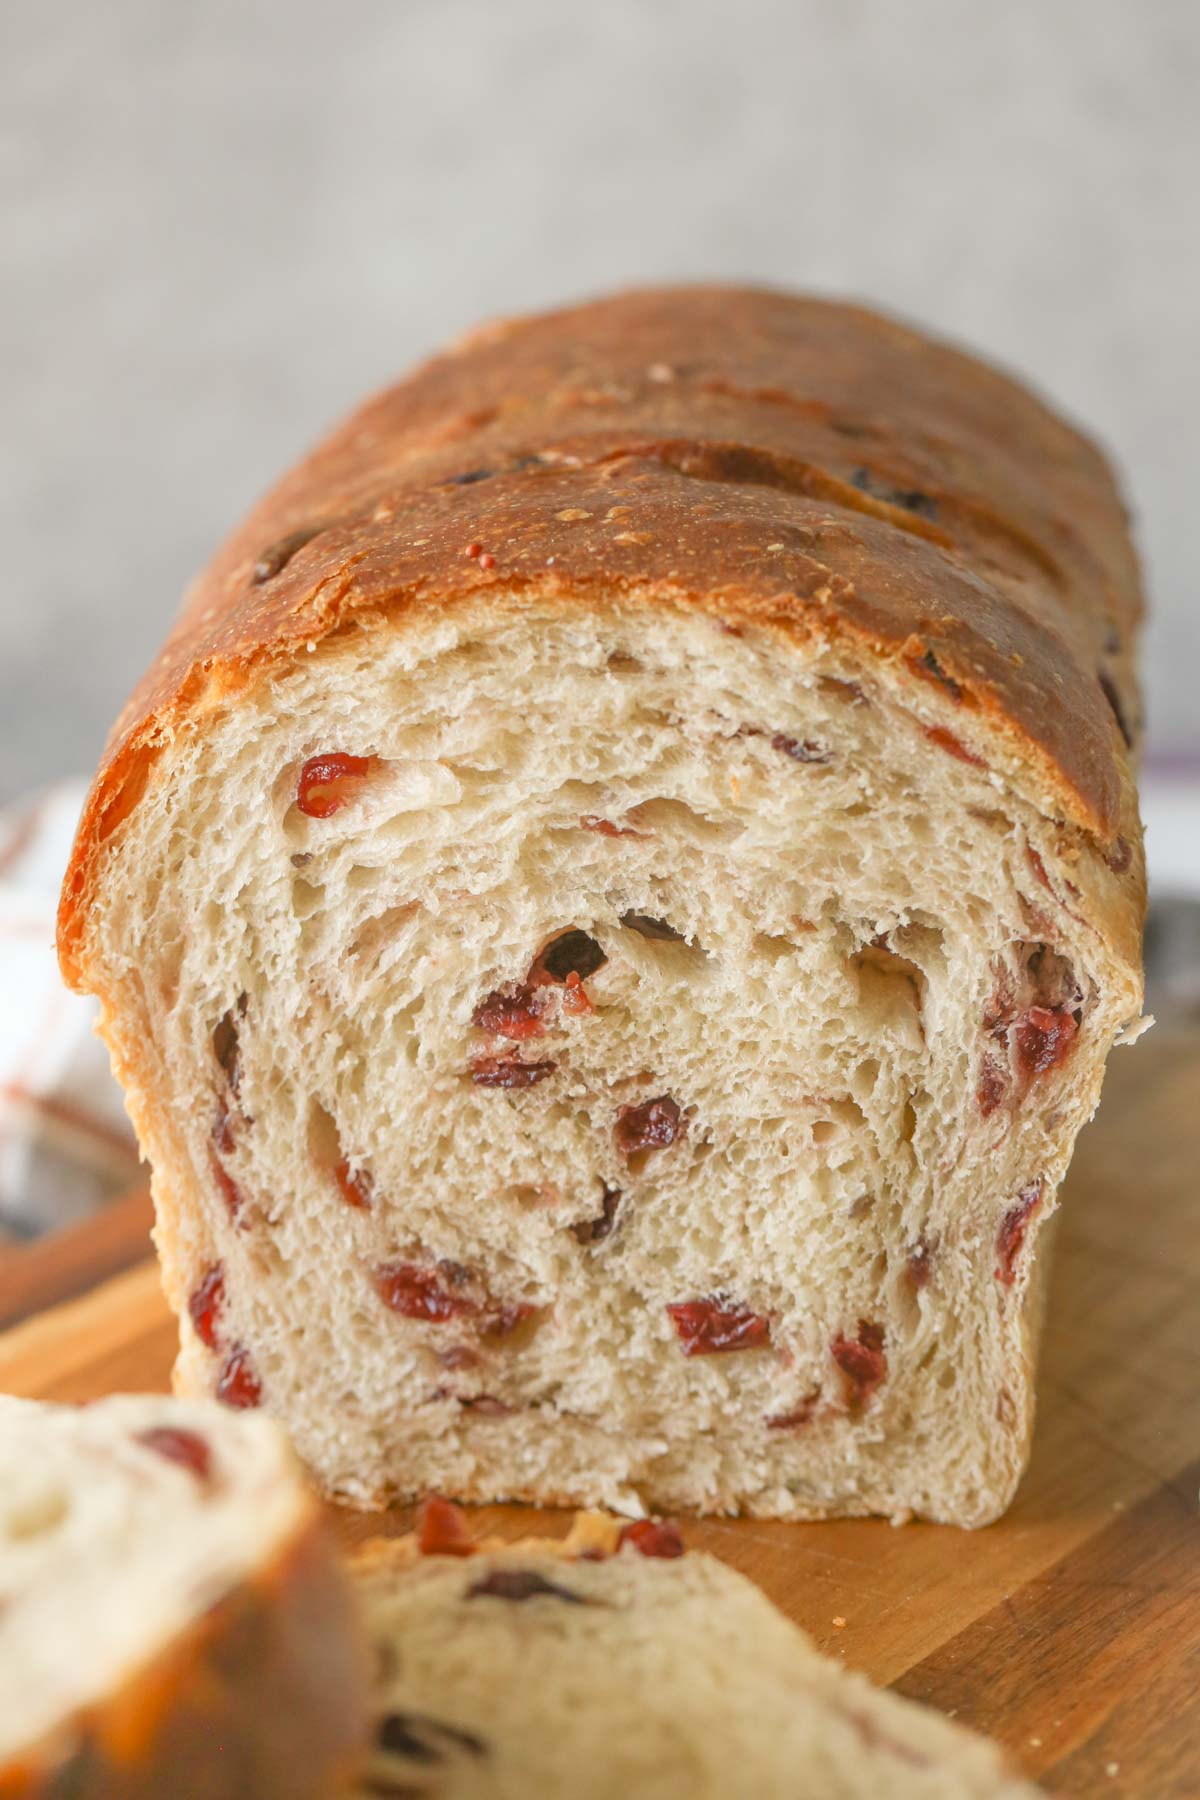 Close up shot of a loaf of Sourdough Cranberry Bread that has been sliced, showing the inside texture of the loaf.  